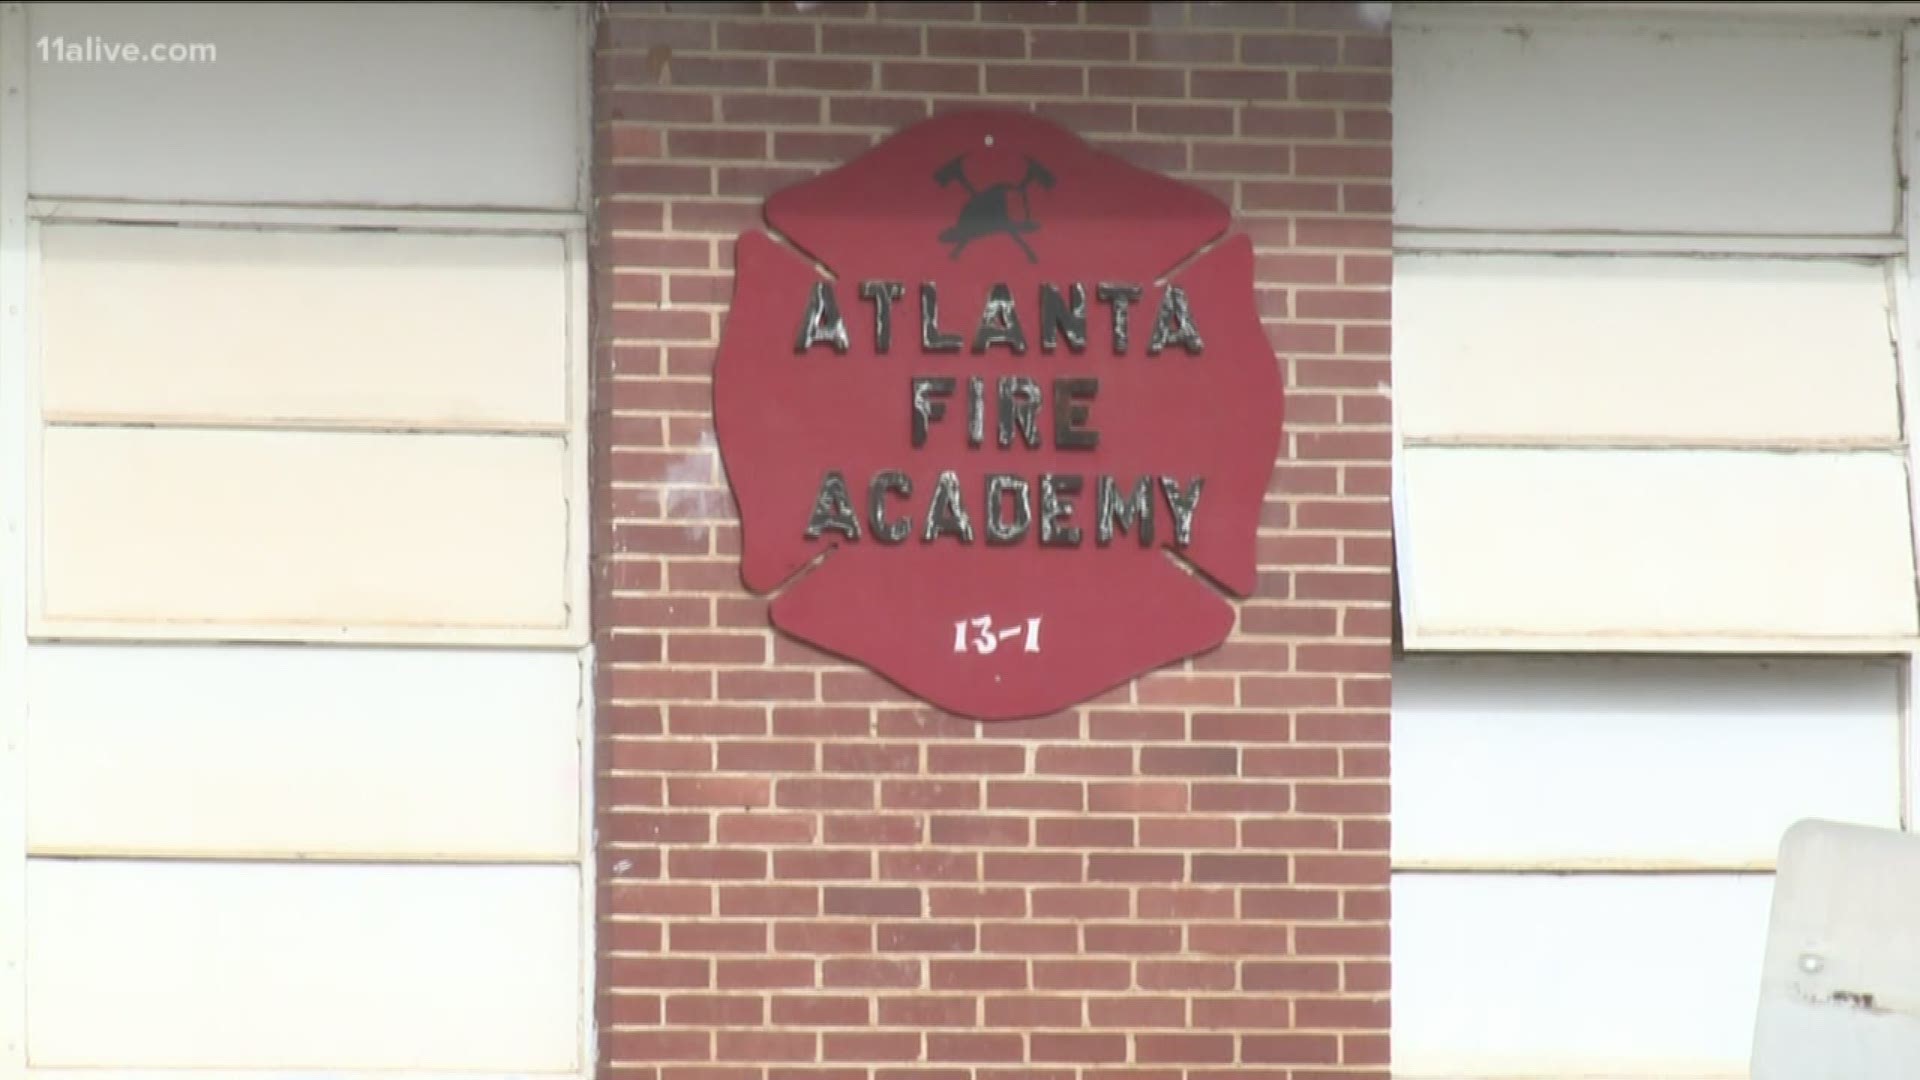 The place responsible for training Atlanta's future firefighters is now closed.